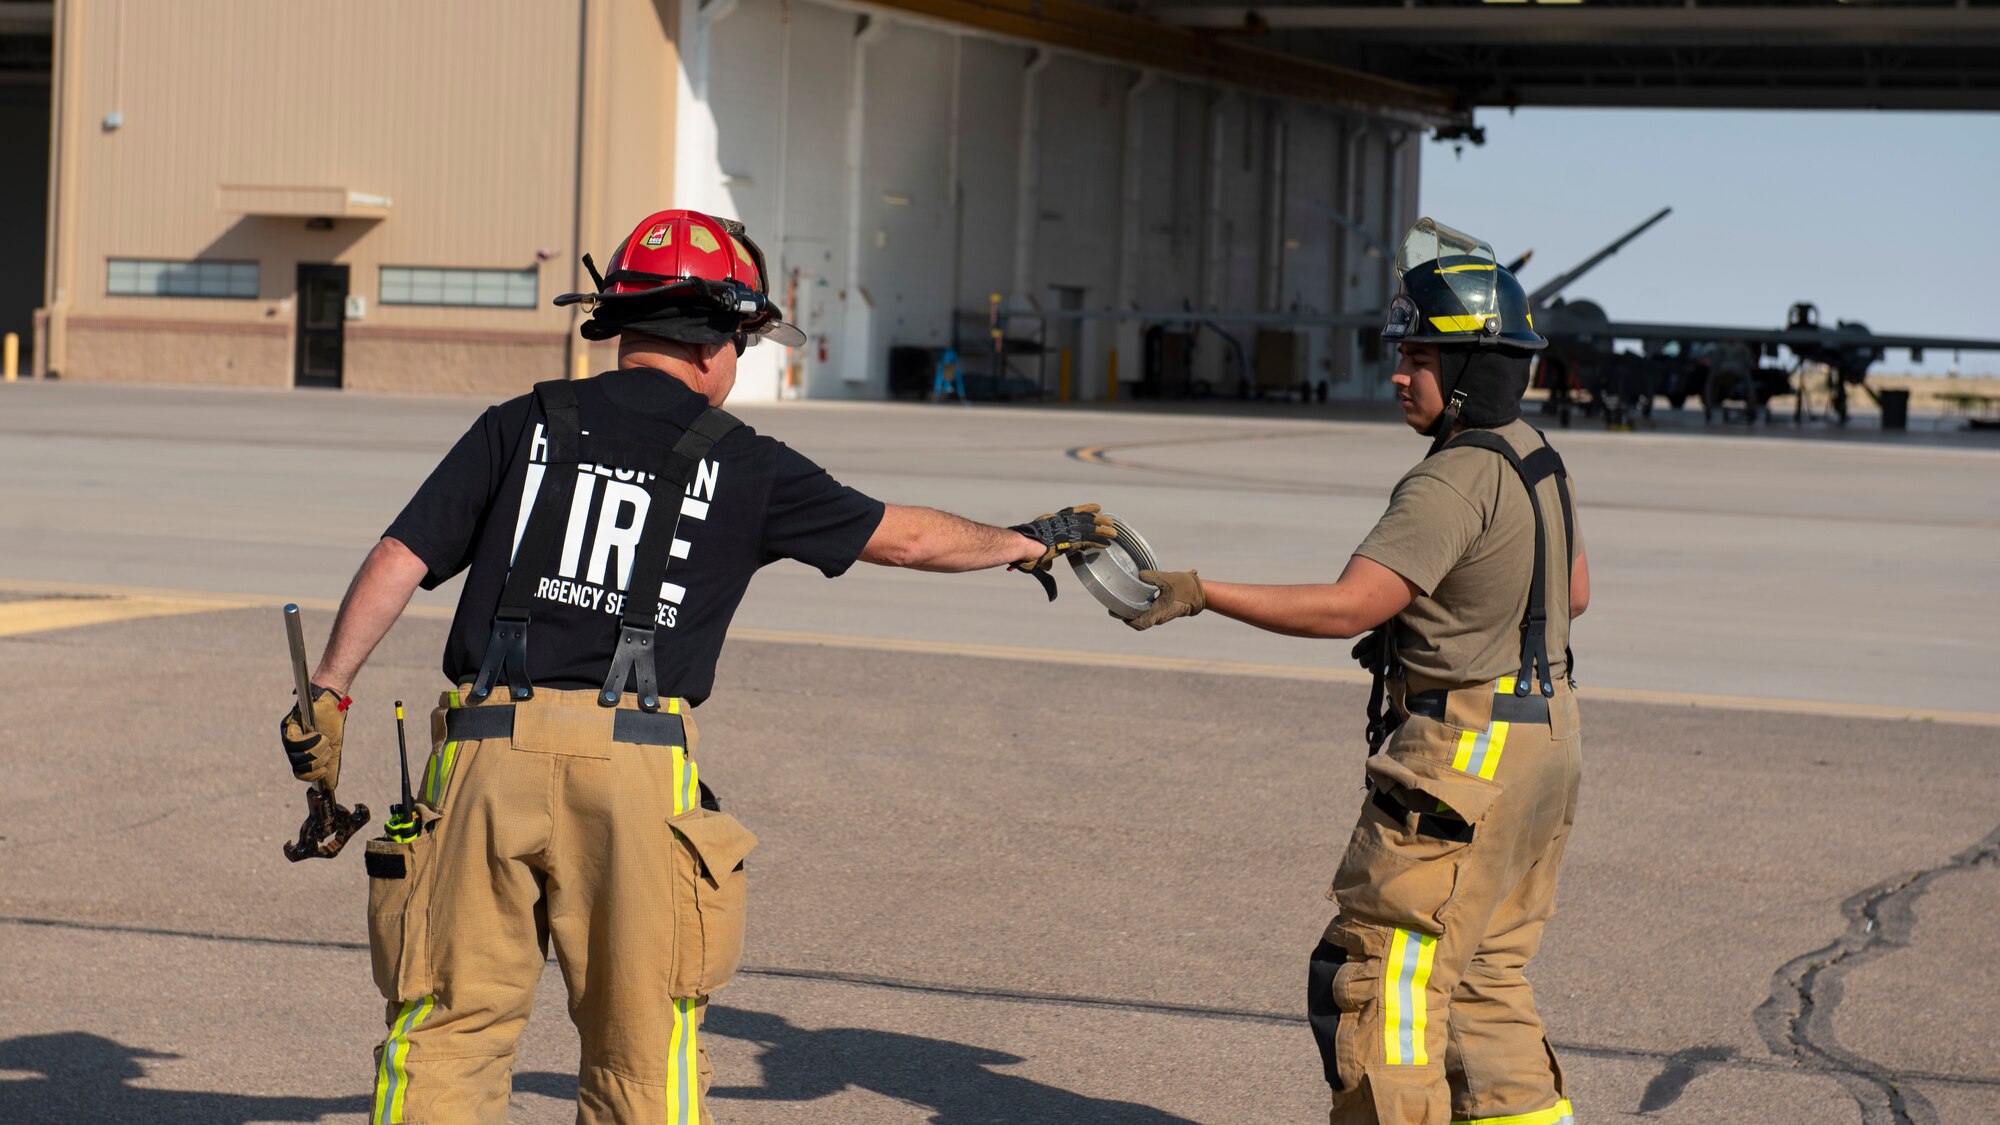 Airman 1st Class Kevin Gomez (right), 49th Civil Engineer Squadron firefighter hands Norman Bloom (left), 49th CES company officer, a fire hose adapter during an emergency response training exercise, May 19, 2022, on Holloman Air Force Base, New Mexico.